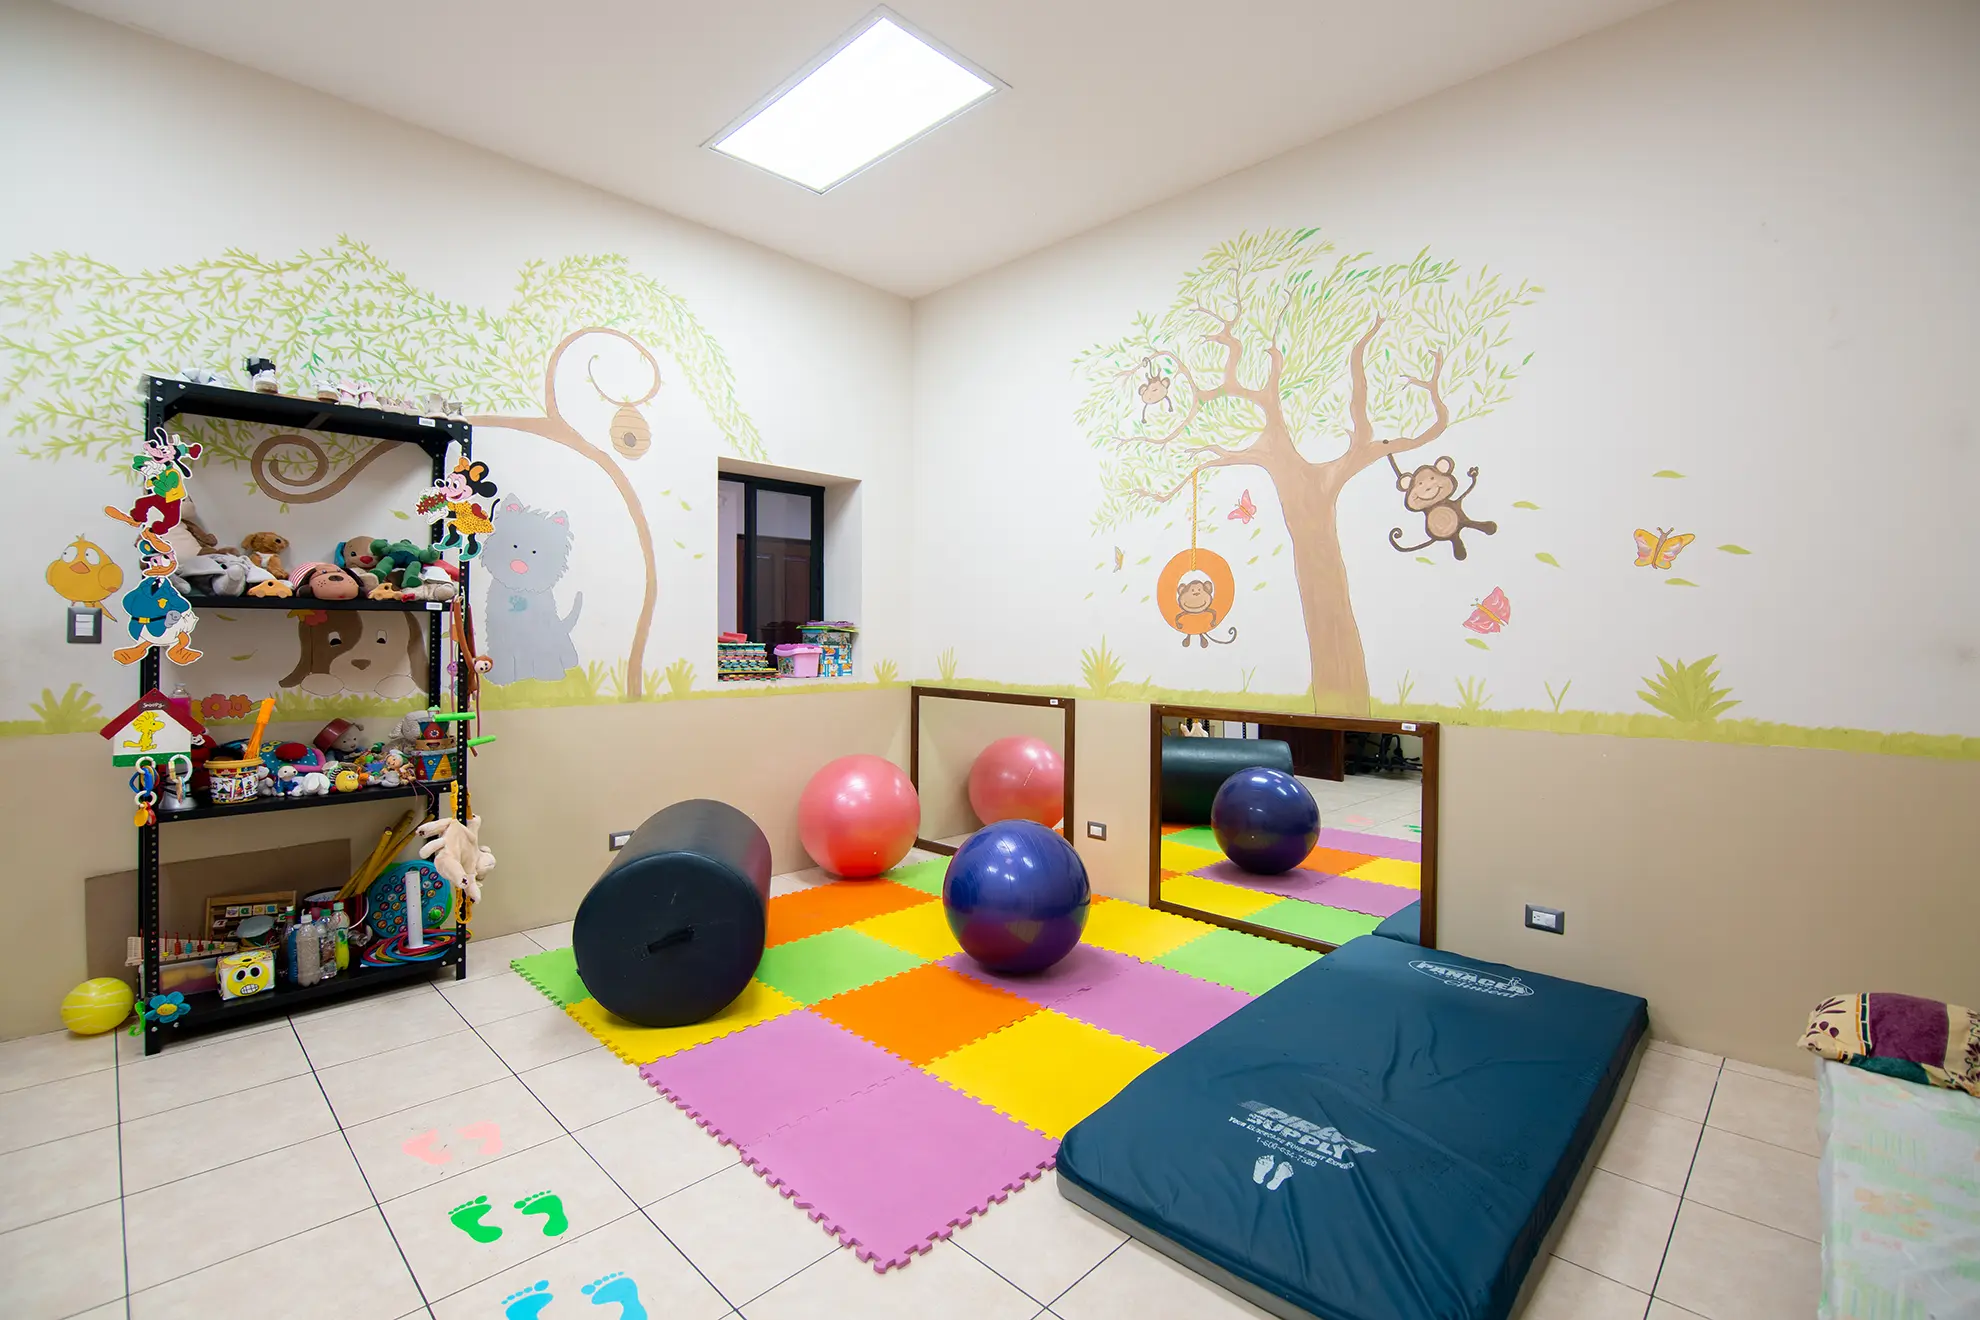 Pediatrics, School of Physical Therapy Annex Building